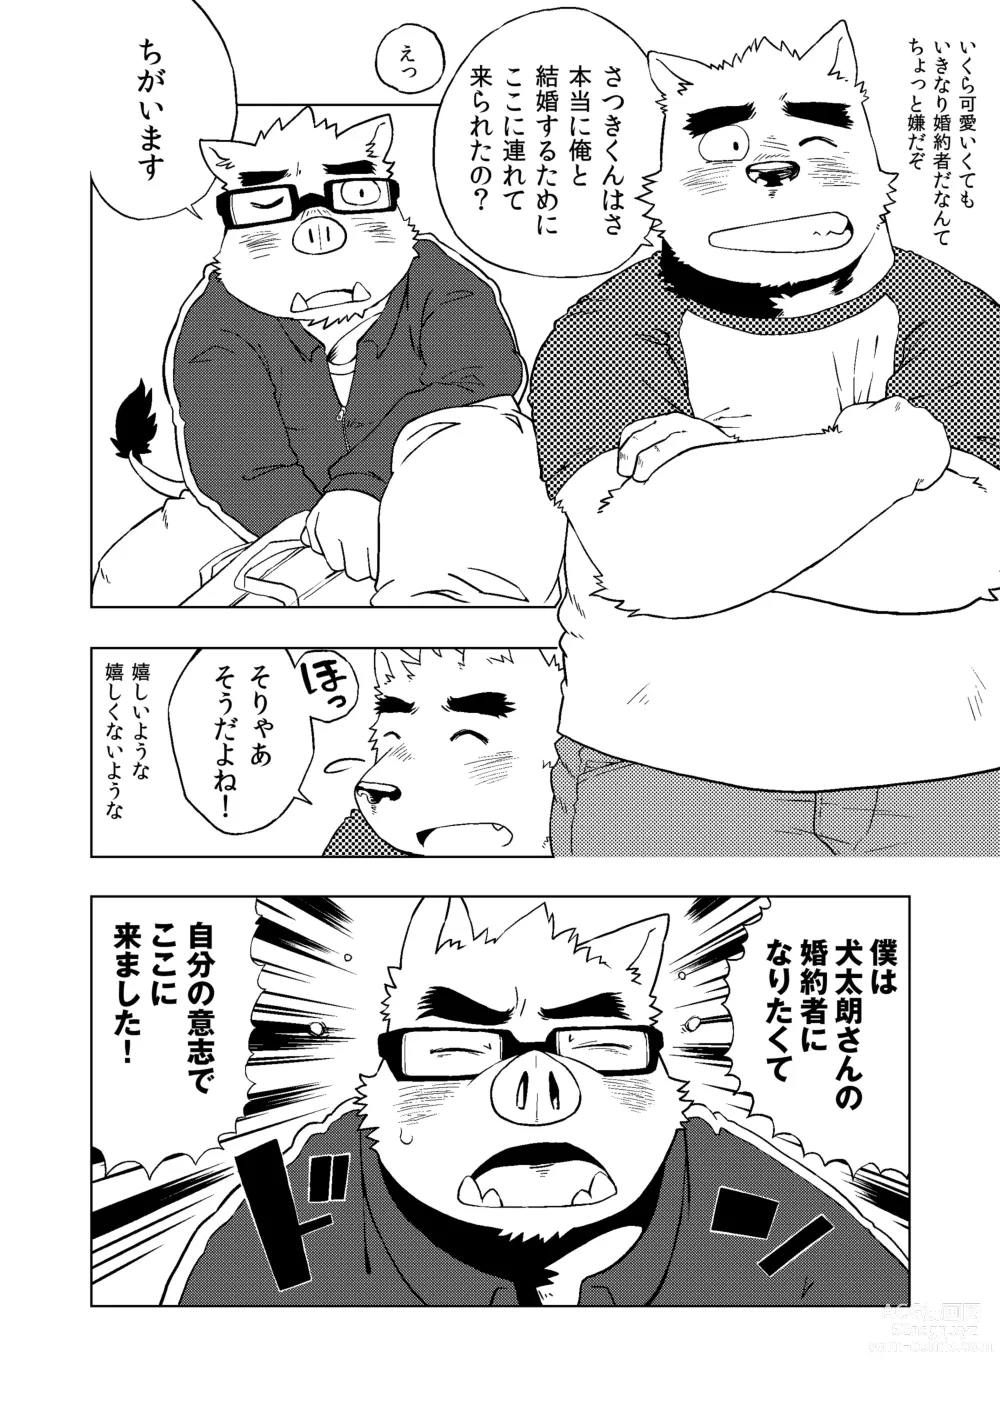 Page 7 of doujinshi Is it true that you are getting married!?